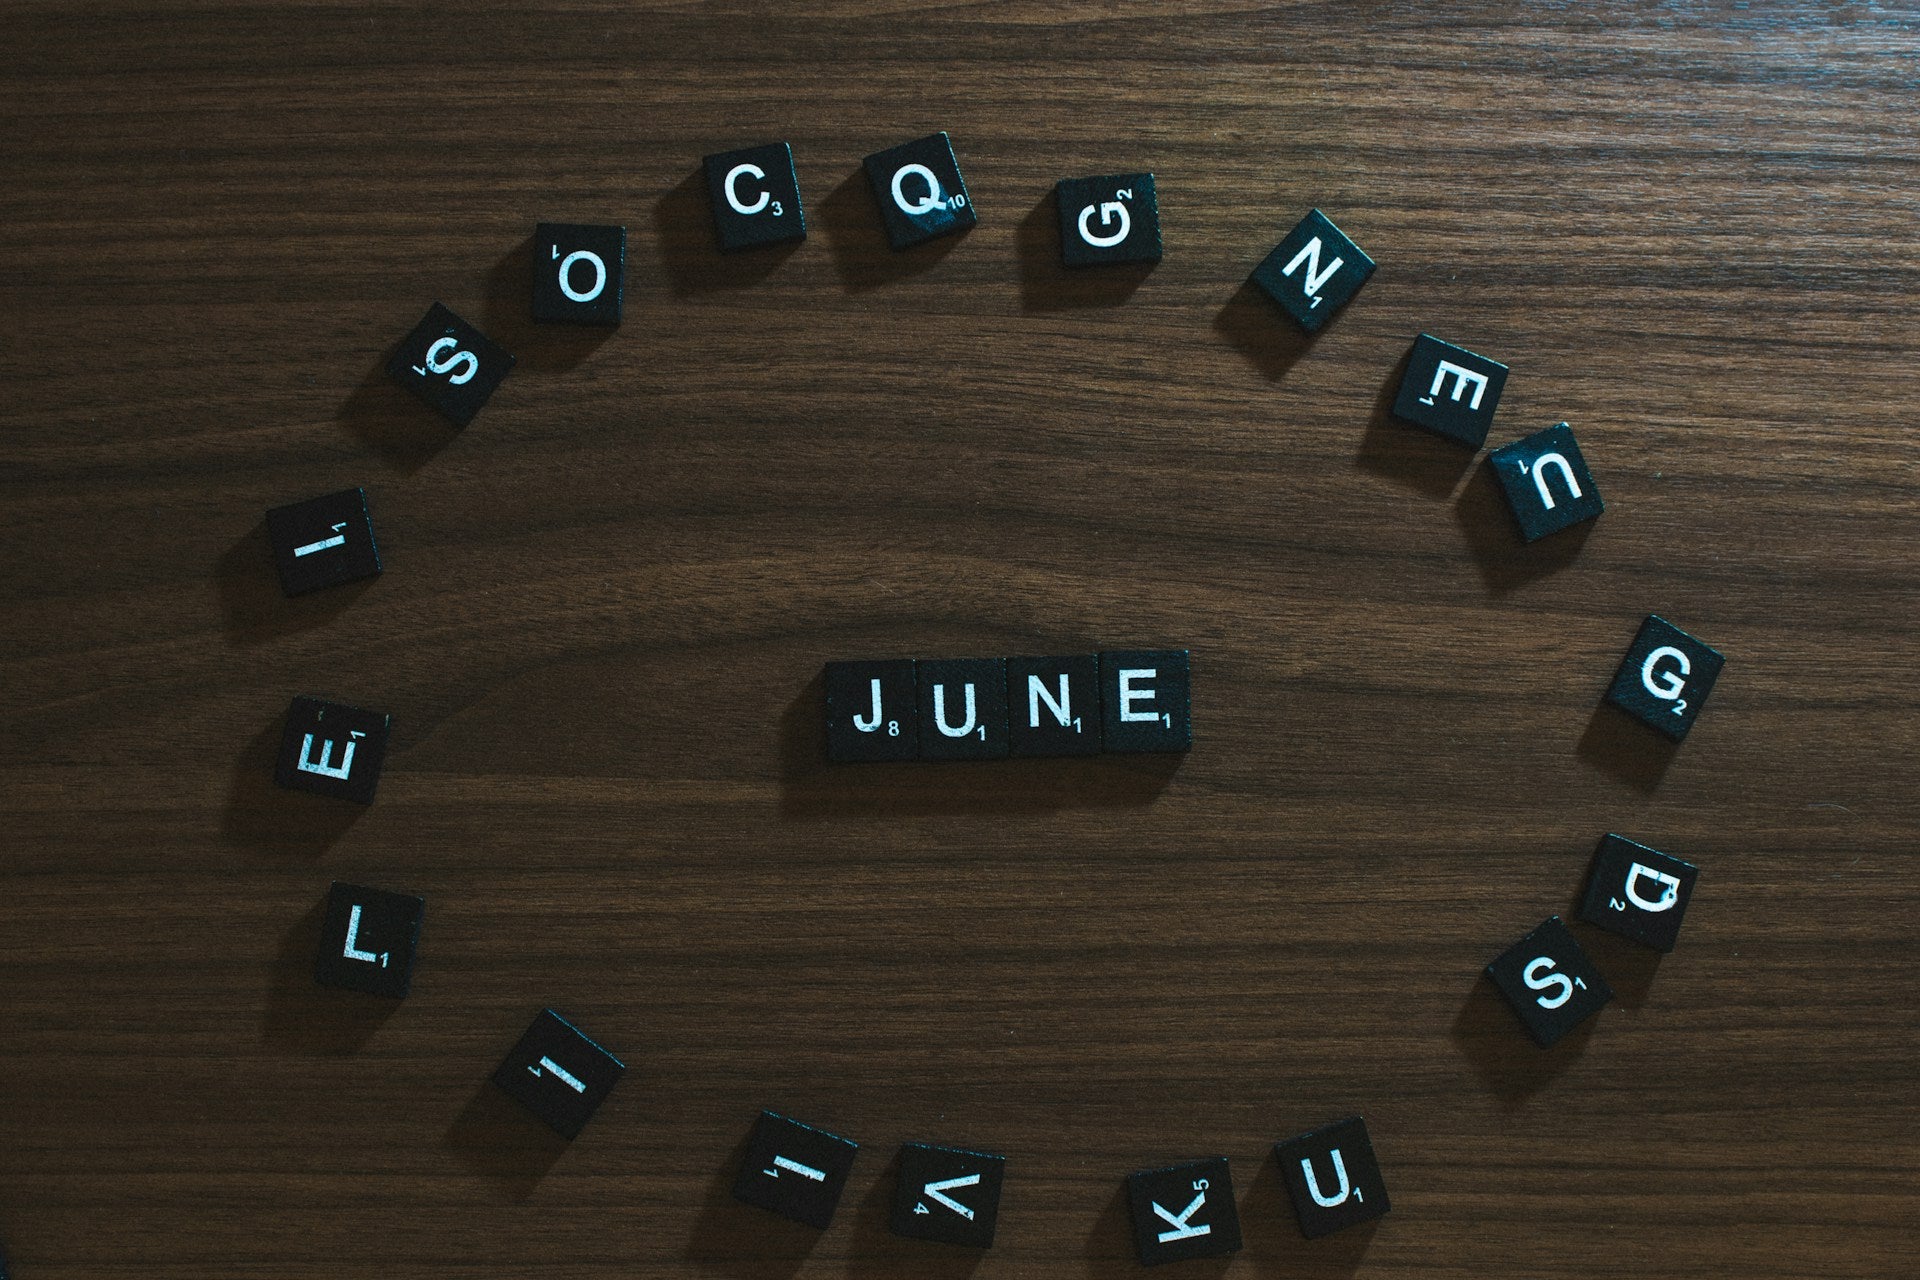 Letter tiles arranged in a circle around tiles that spell out "June."